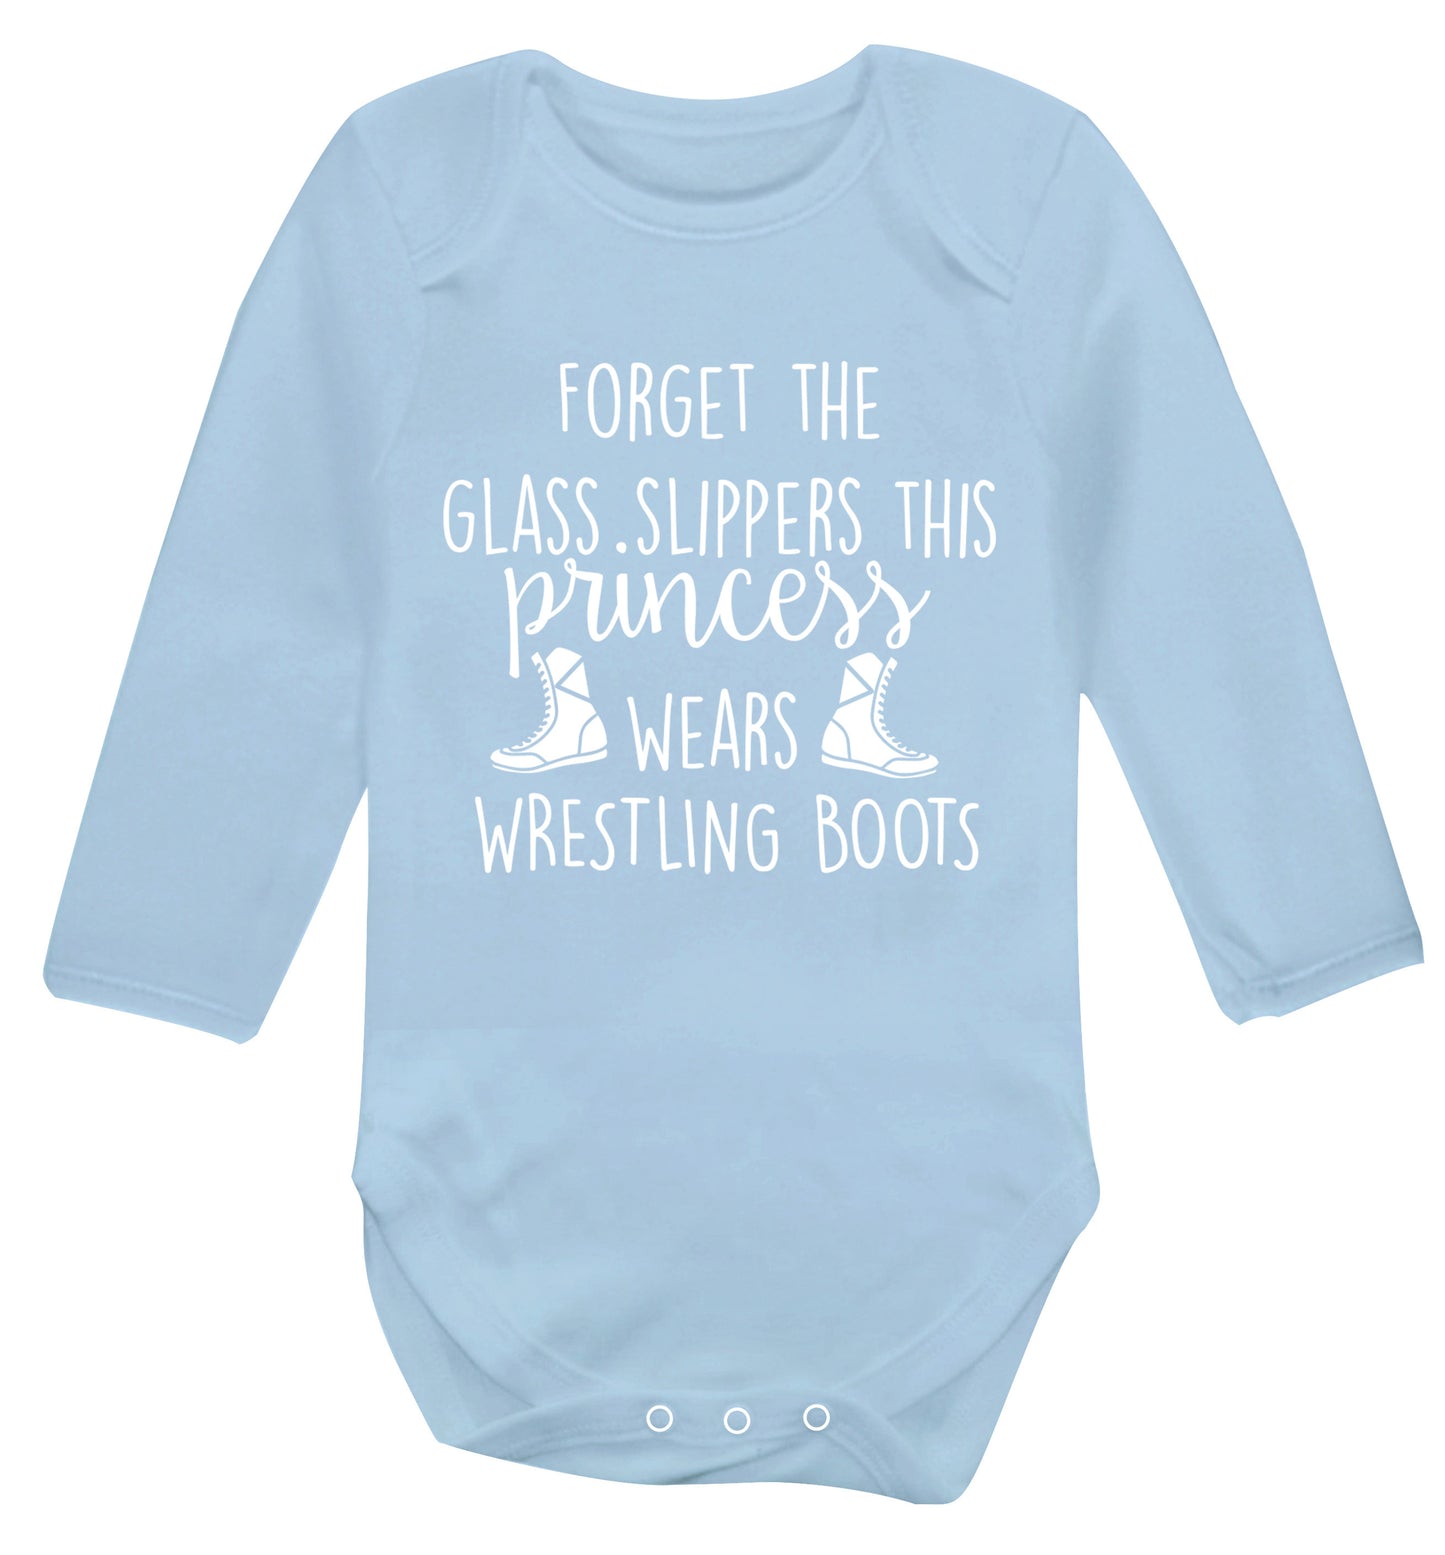 Forget the glass slippers this princess wears wrestling boots Baby Vest long sleeved pale blue 6-12 months